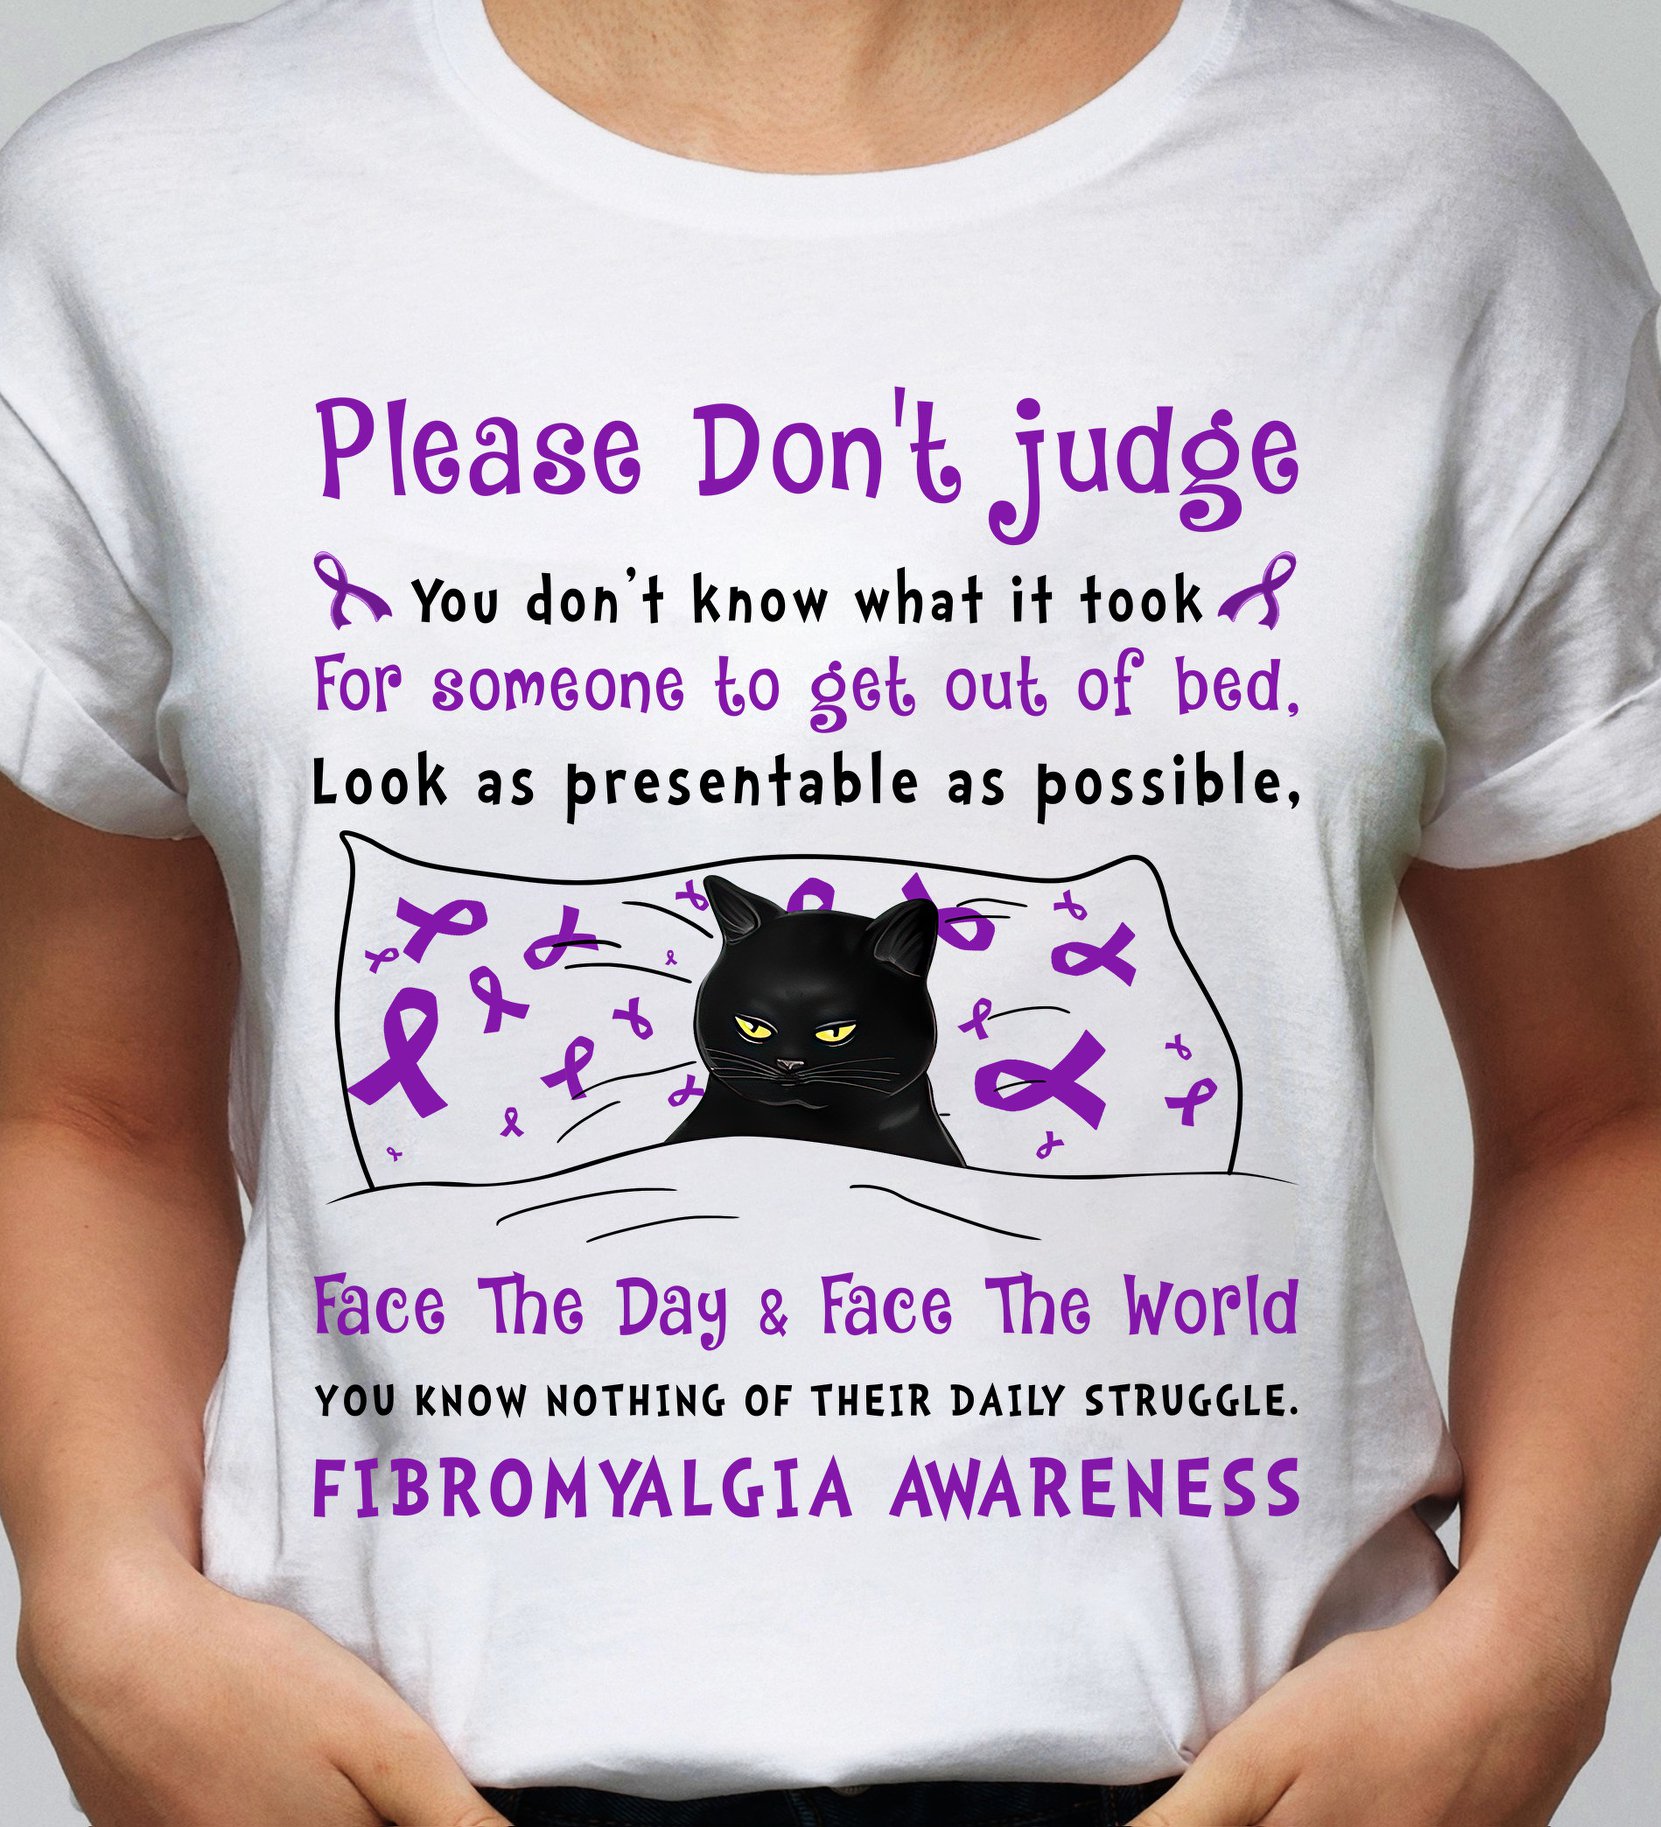 Please don't judge - Face the day and face the world - Fibromyalgia awareness